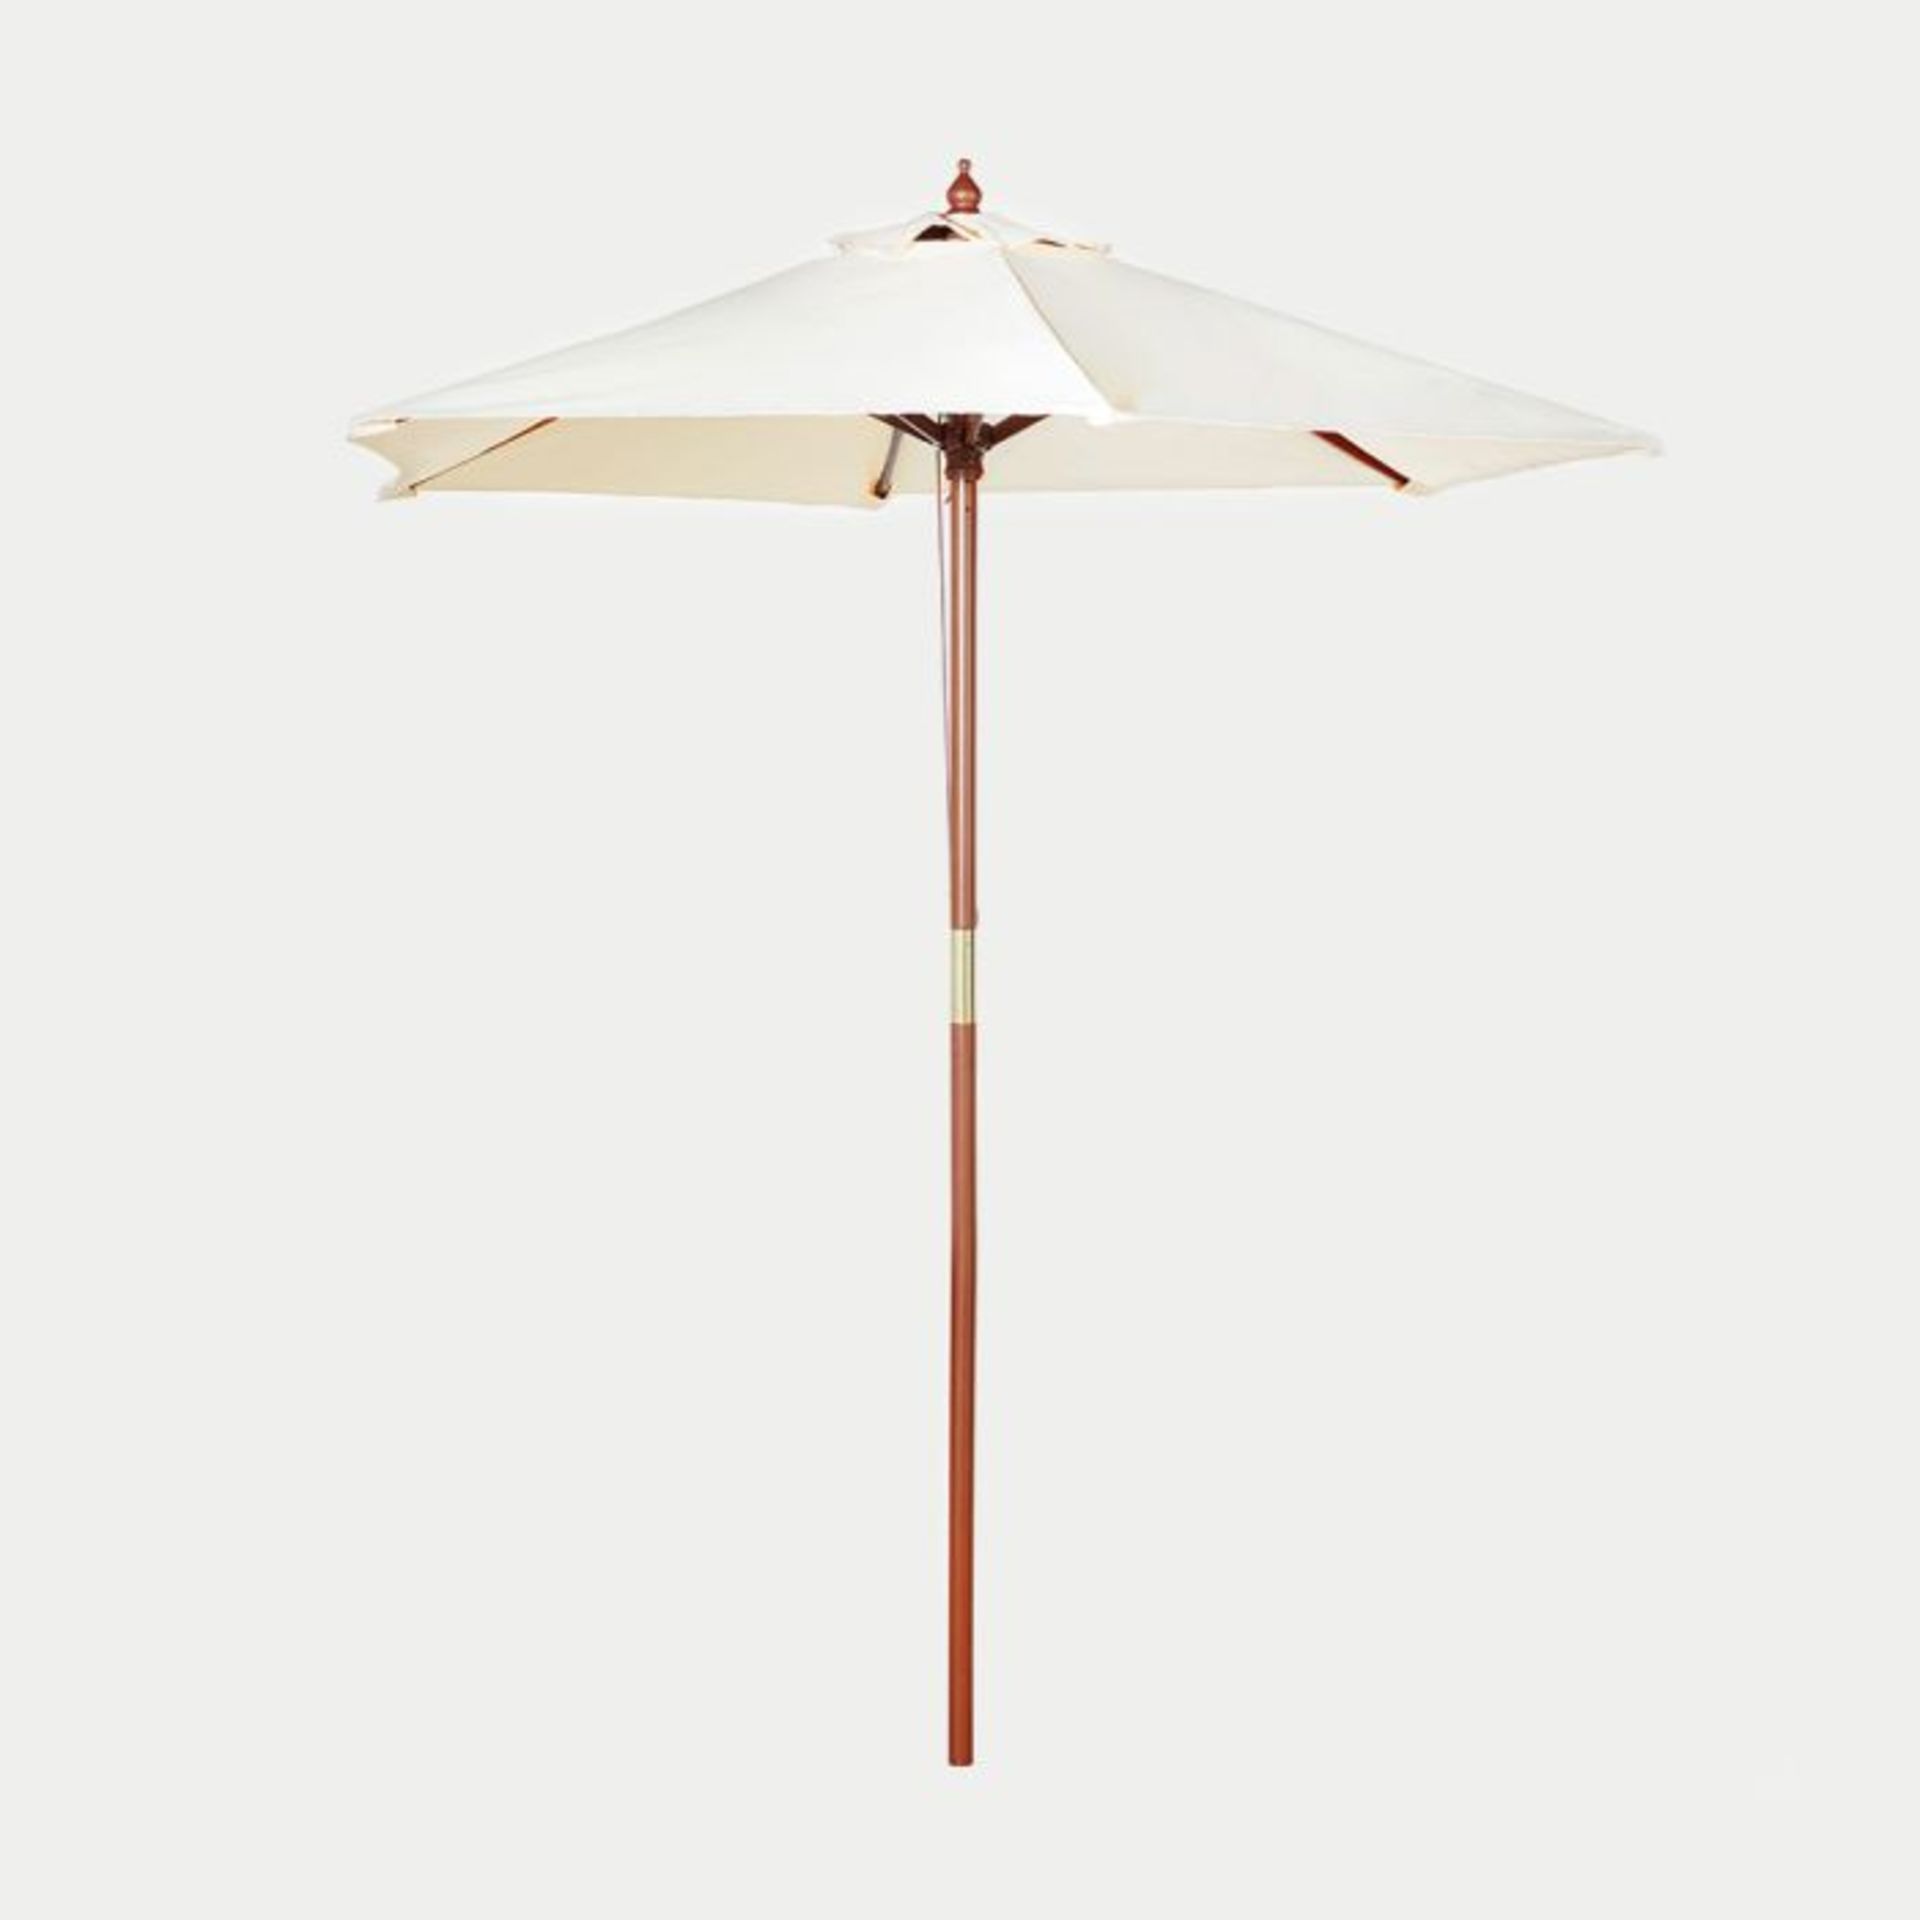 Ivory Cream 2m Wooden Garden Parasol. - ER33. No matter how often you check the weather forecast,